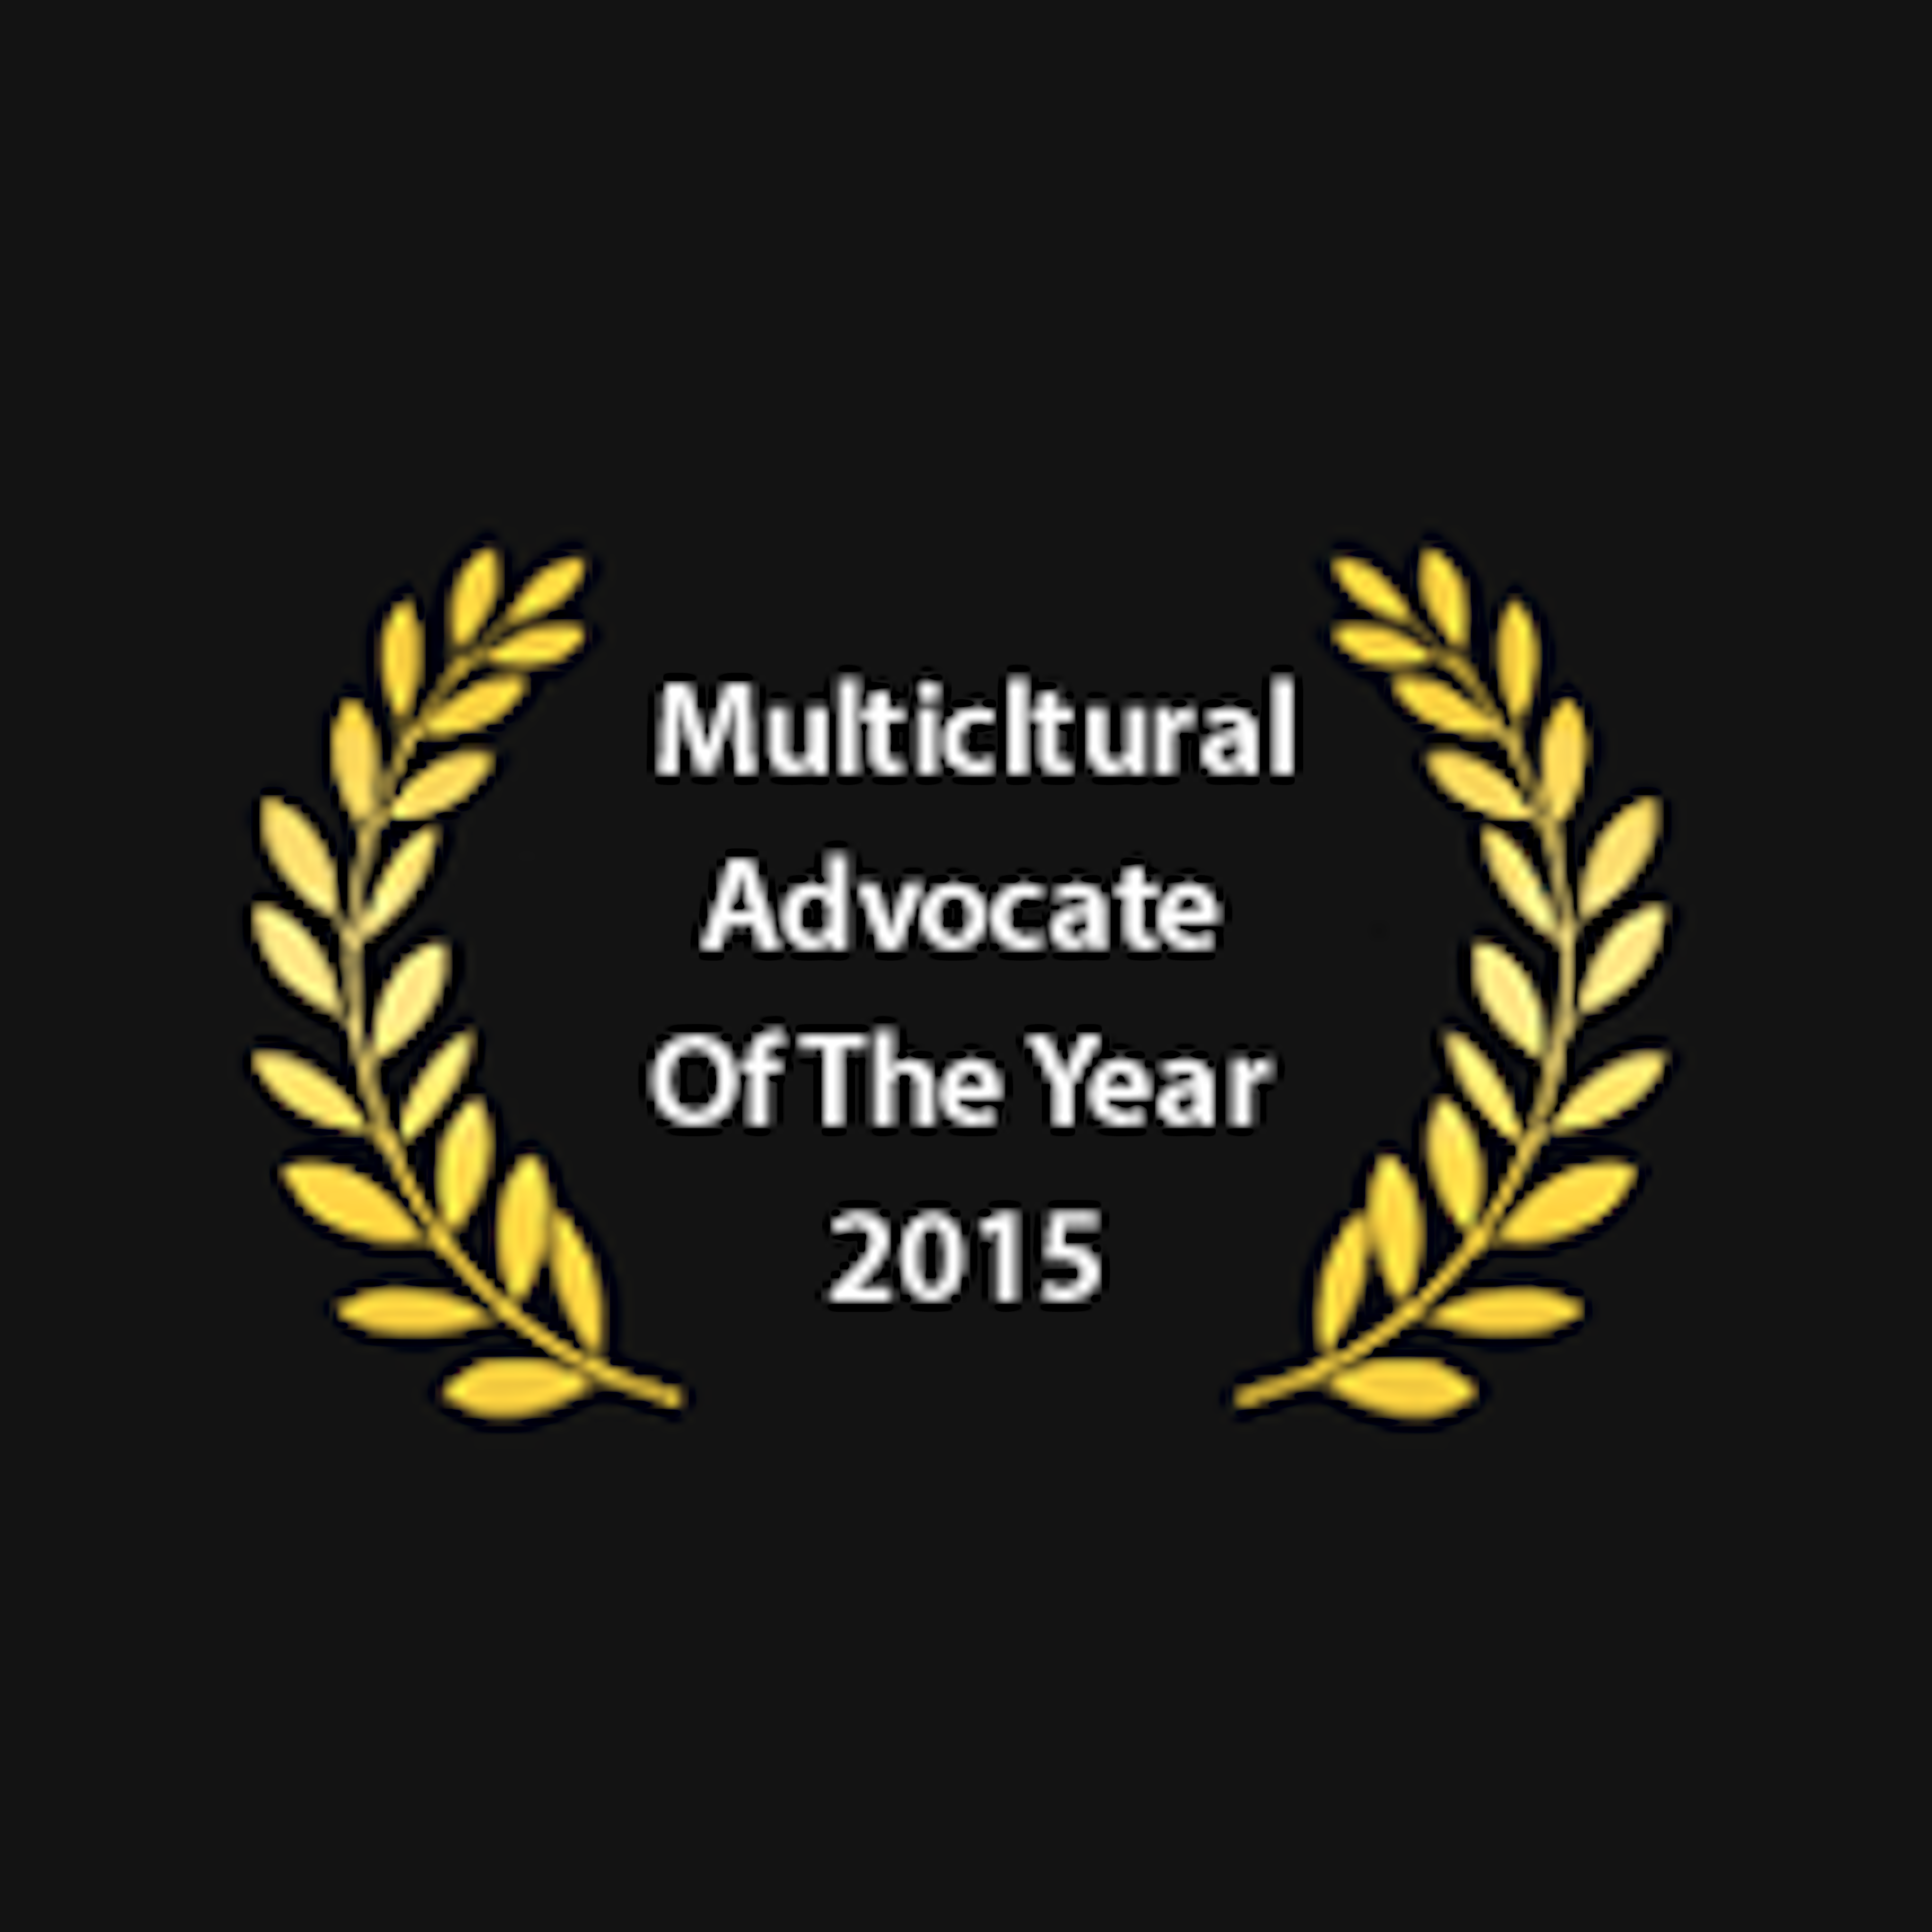 Multicultural Advocate of the Year 2015